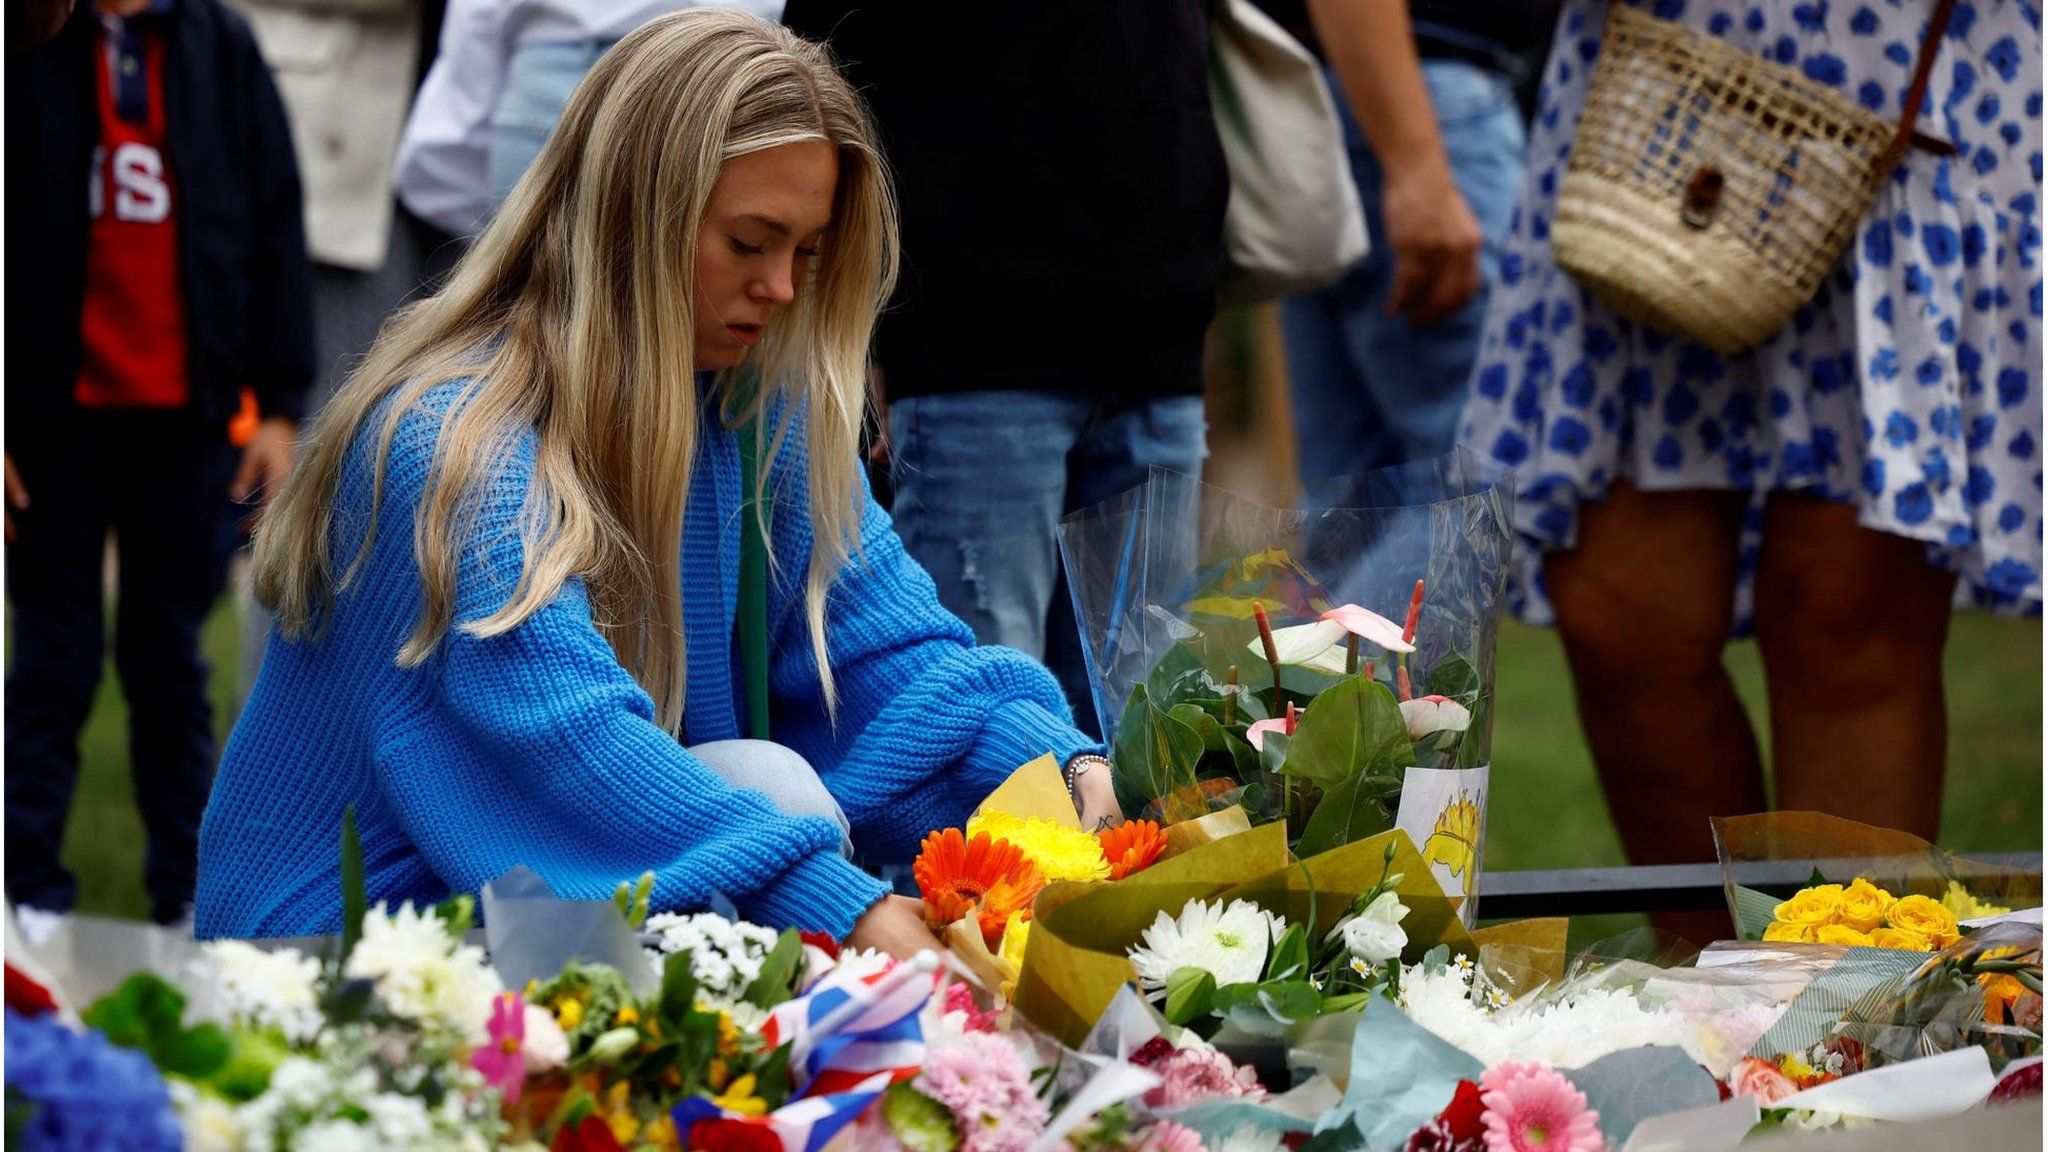 A woman places flowers in St. James' Park near Buckingham Palace (10 September 2022)